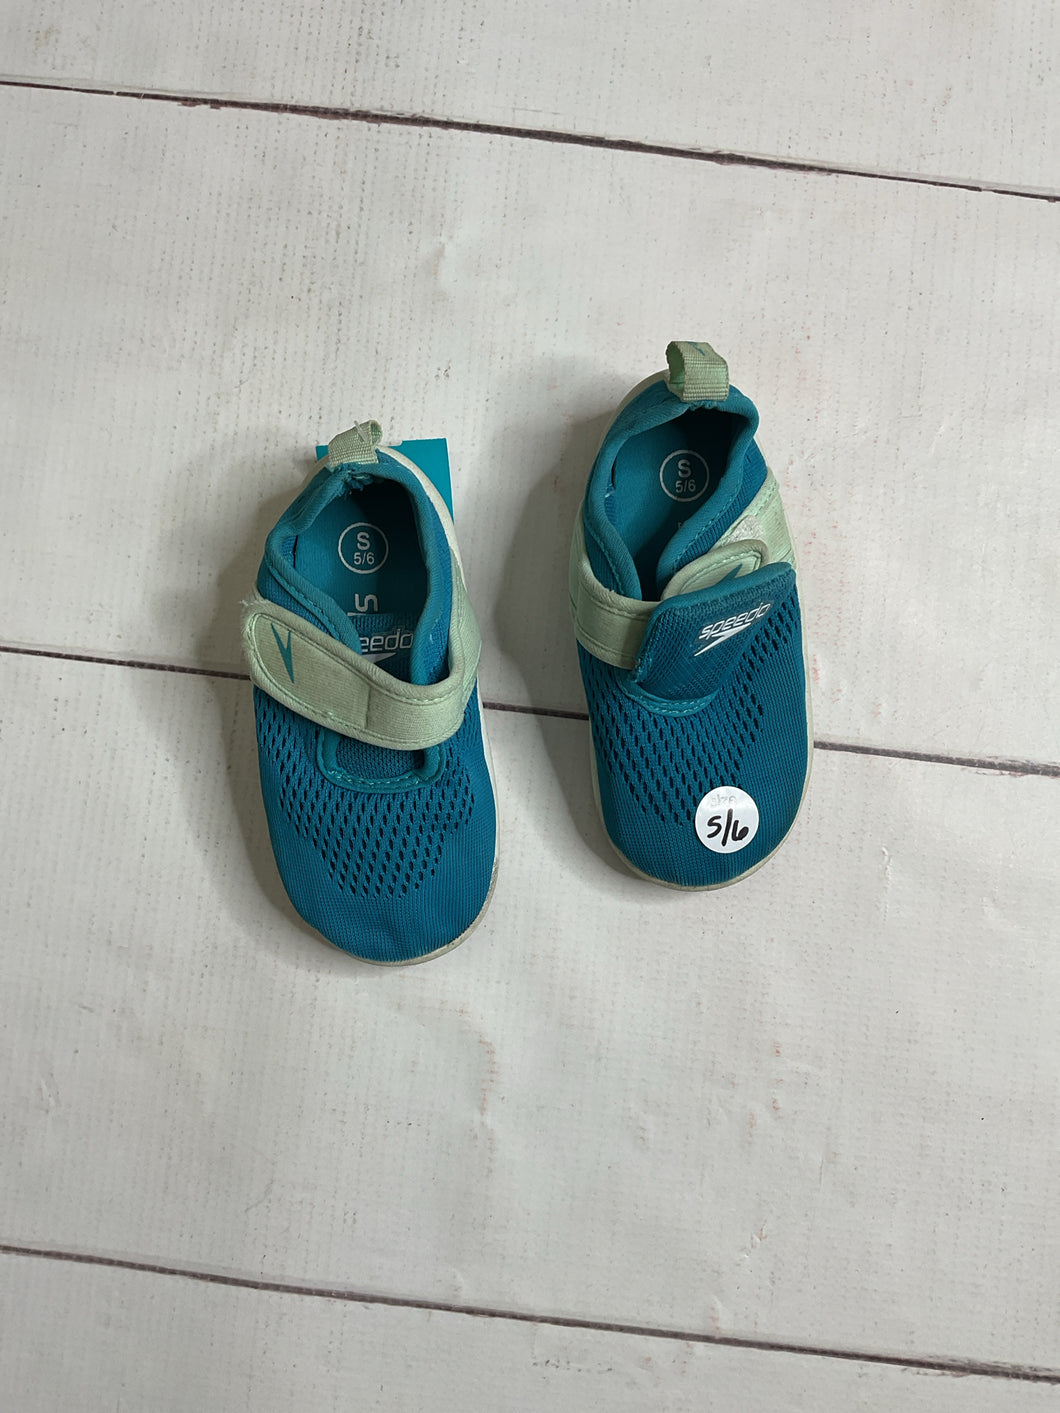 Speedo Size 5/6 Water Shoes